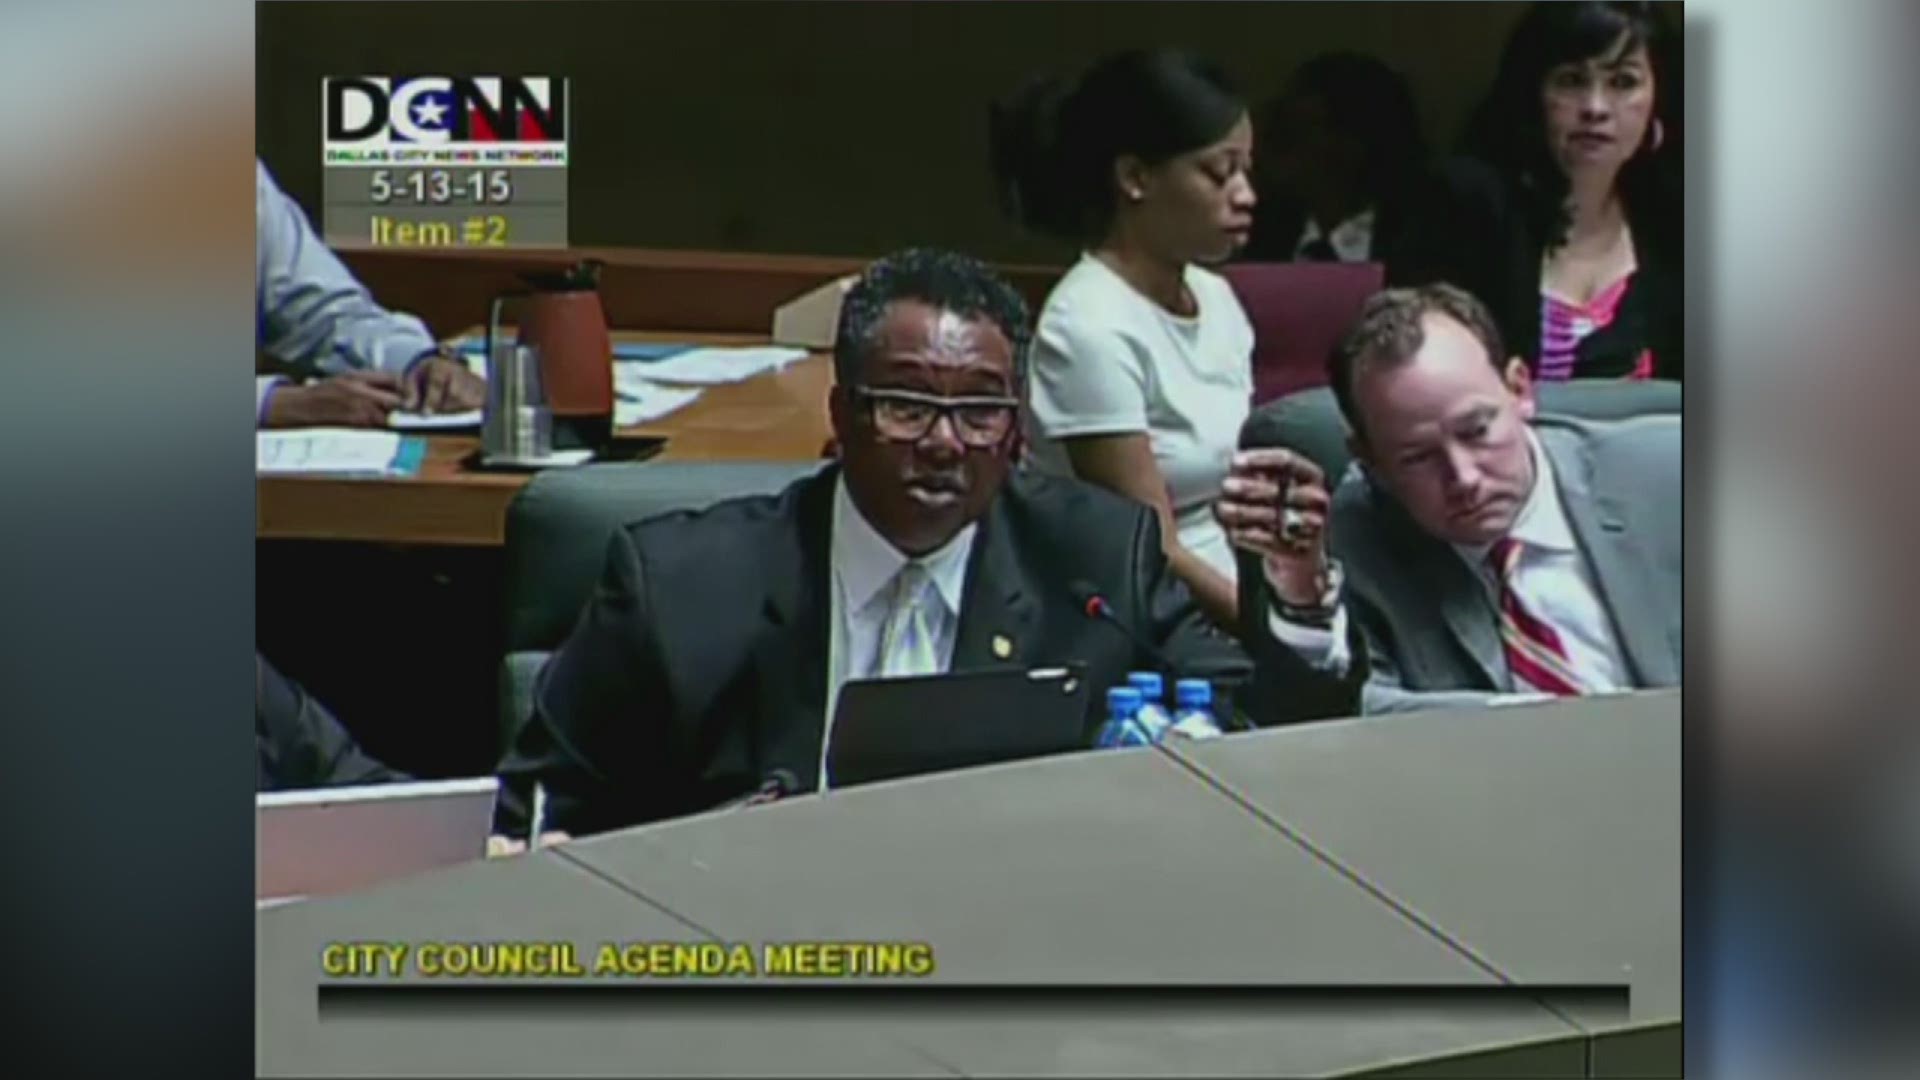 Dwaine Caraway went to bat for a tech company's school bus camera technology in a 2015 speech, which he has now admitted was part of an elaborate bribery scheme. Video: Dallas City Council archives